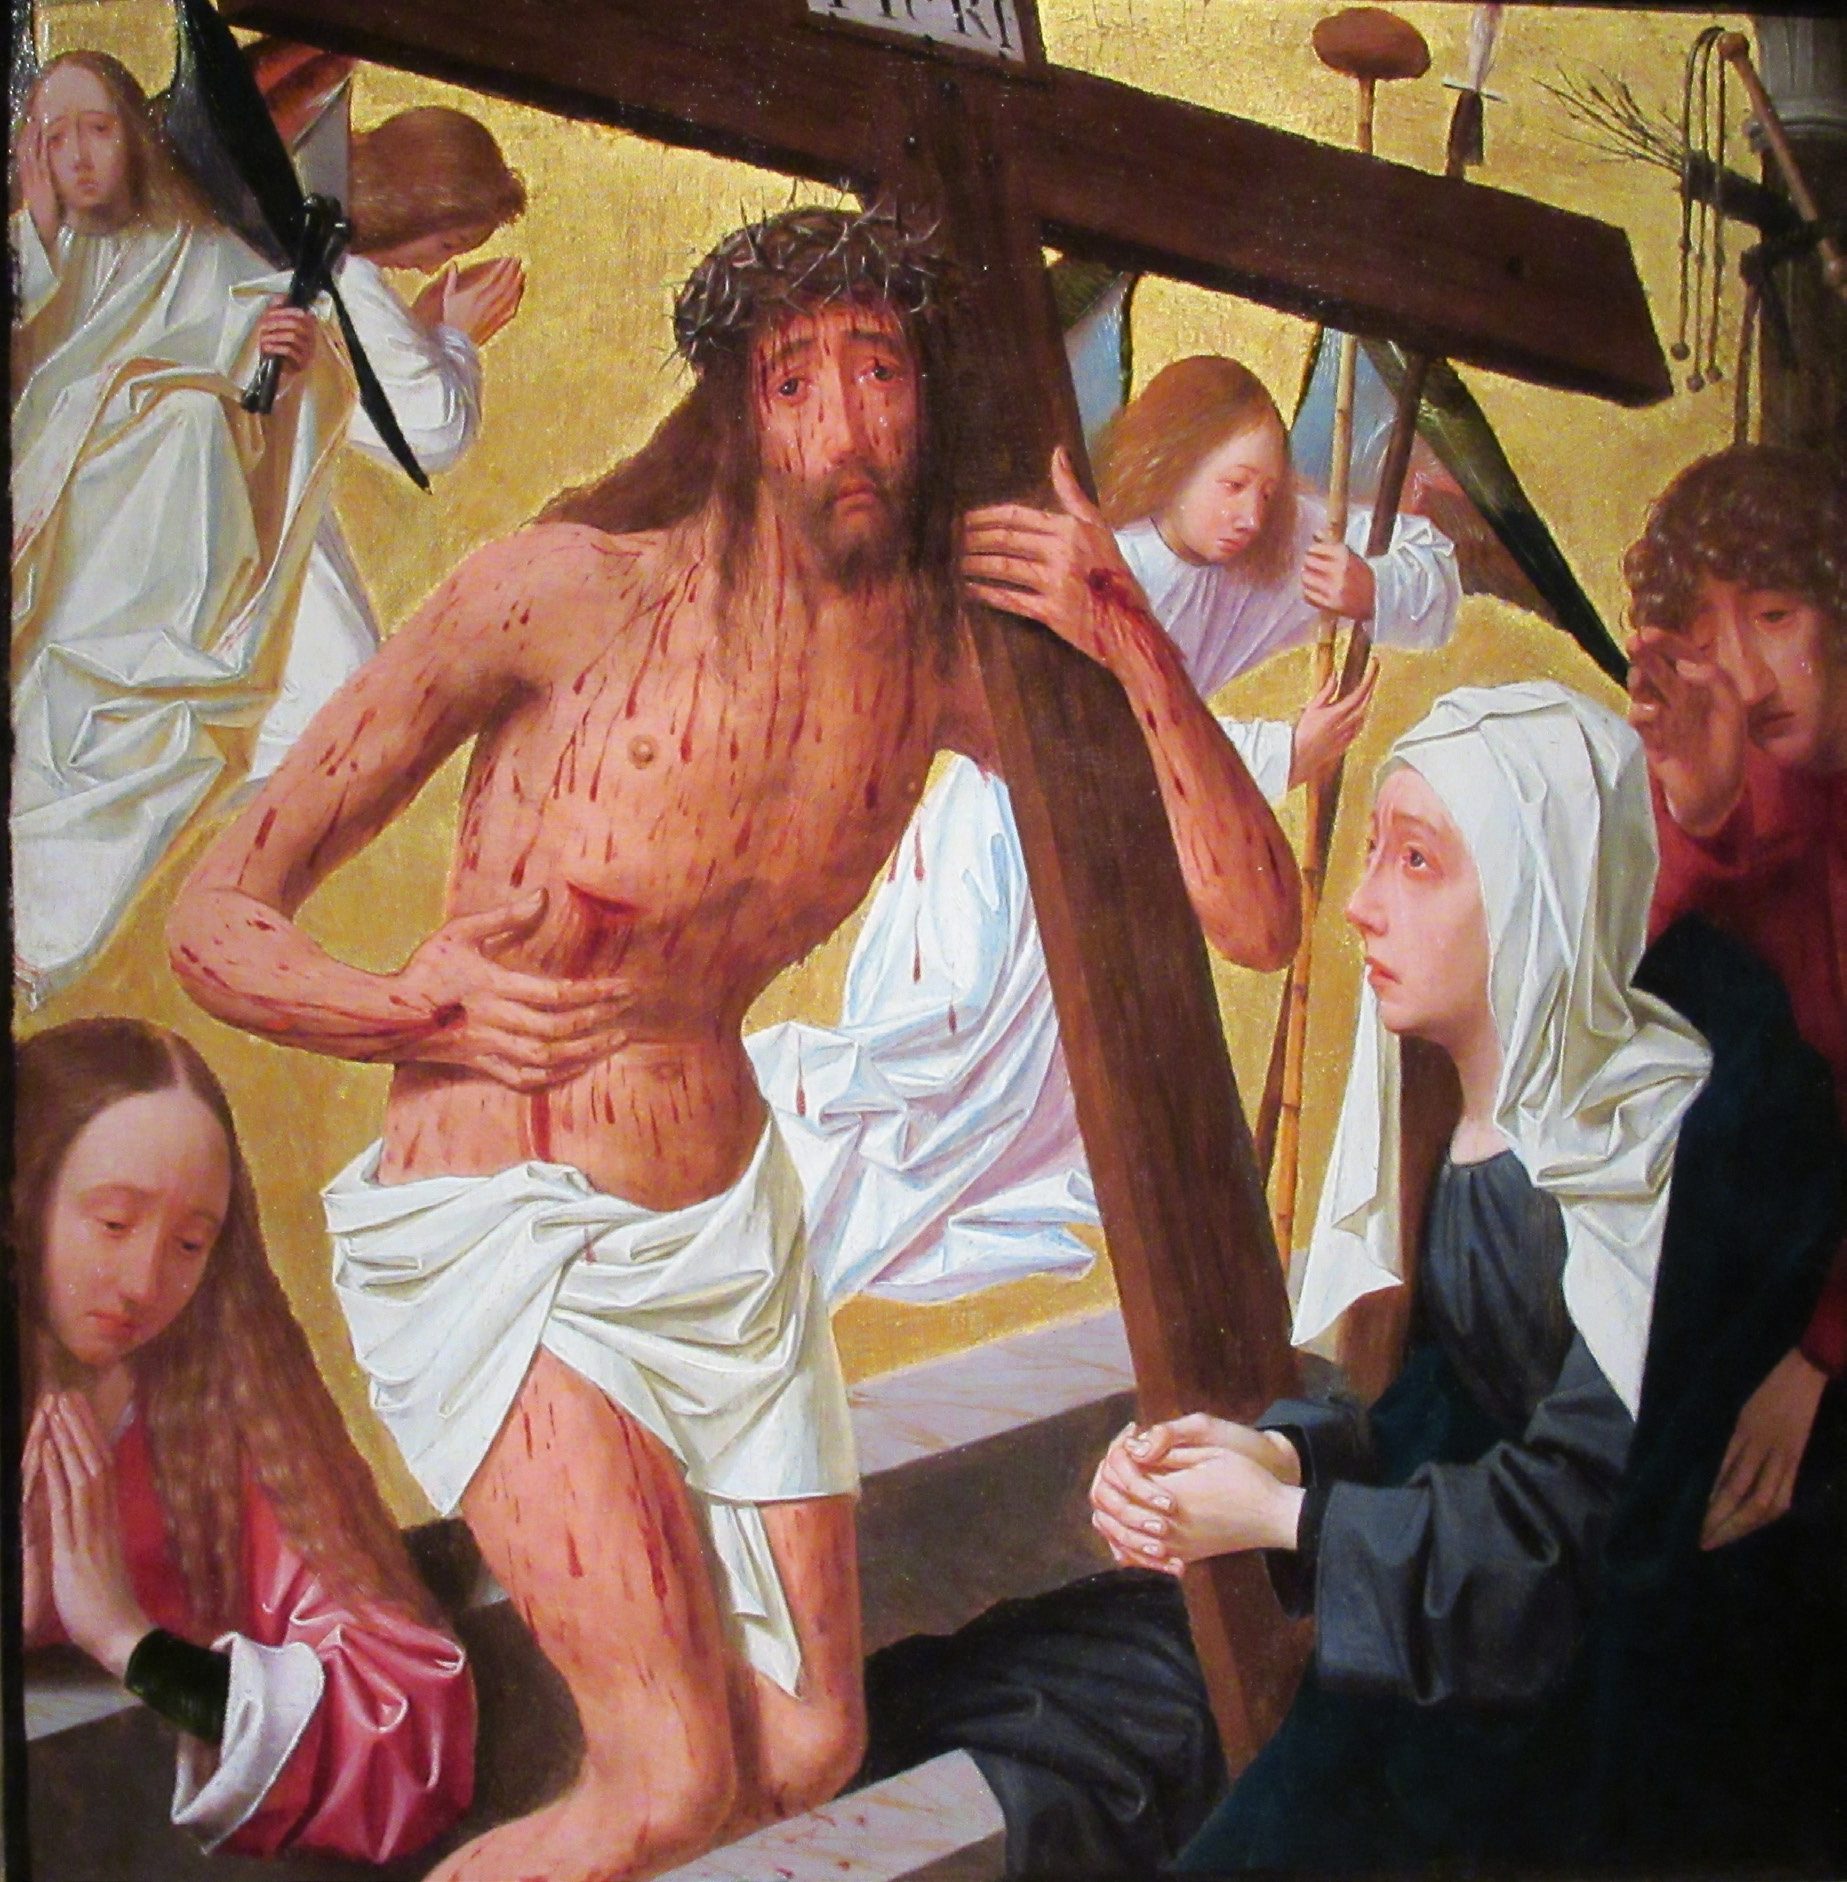 Christ invites us to behold the wounds and the prints of the nails so our faith and hope can grow. Geertgen tot Sint-Jans, Man van Smarten, ca. 1490. Museum Catharijneconvent, Utrecht.